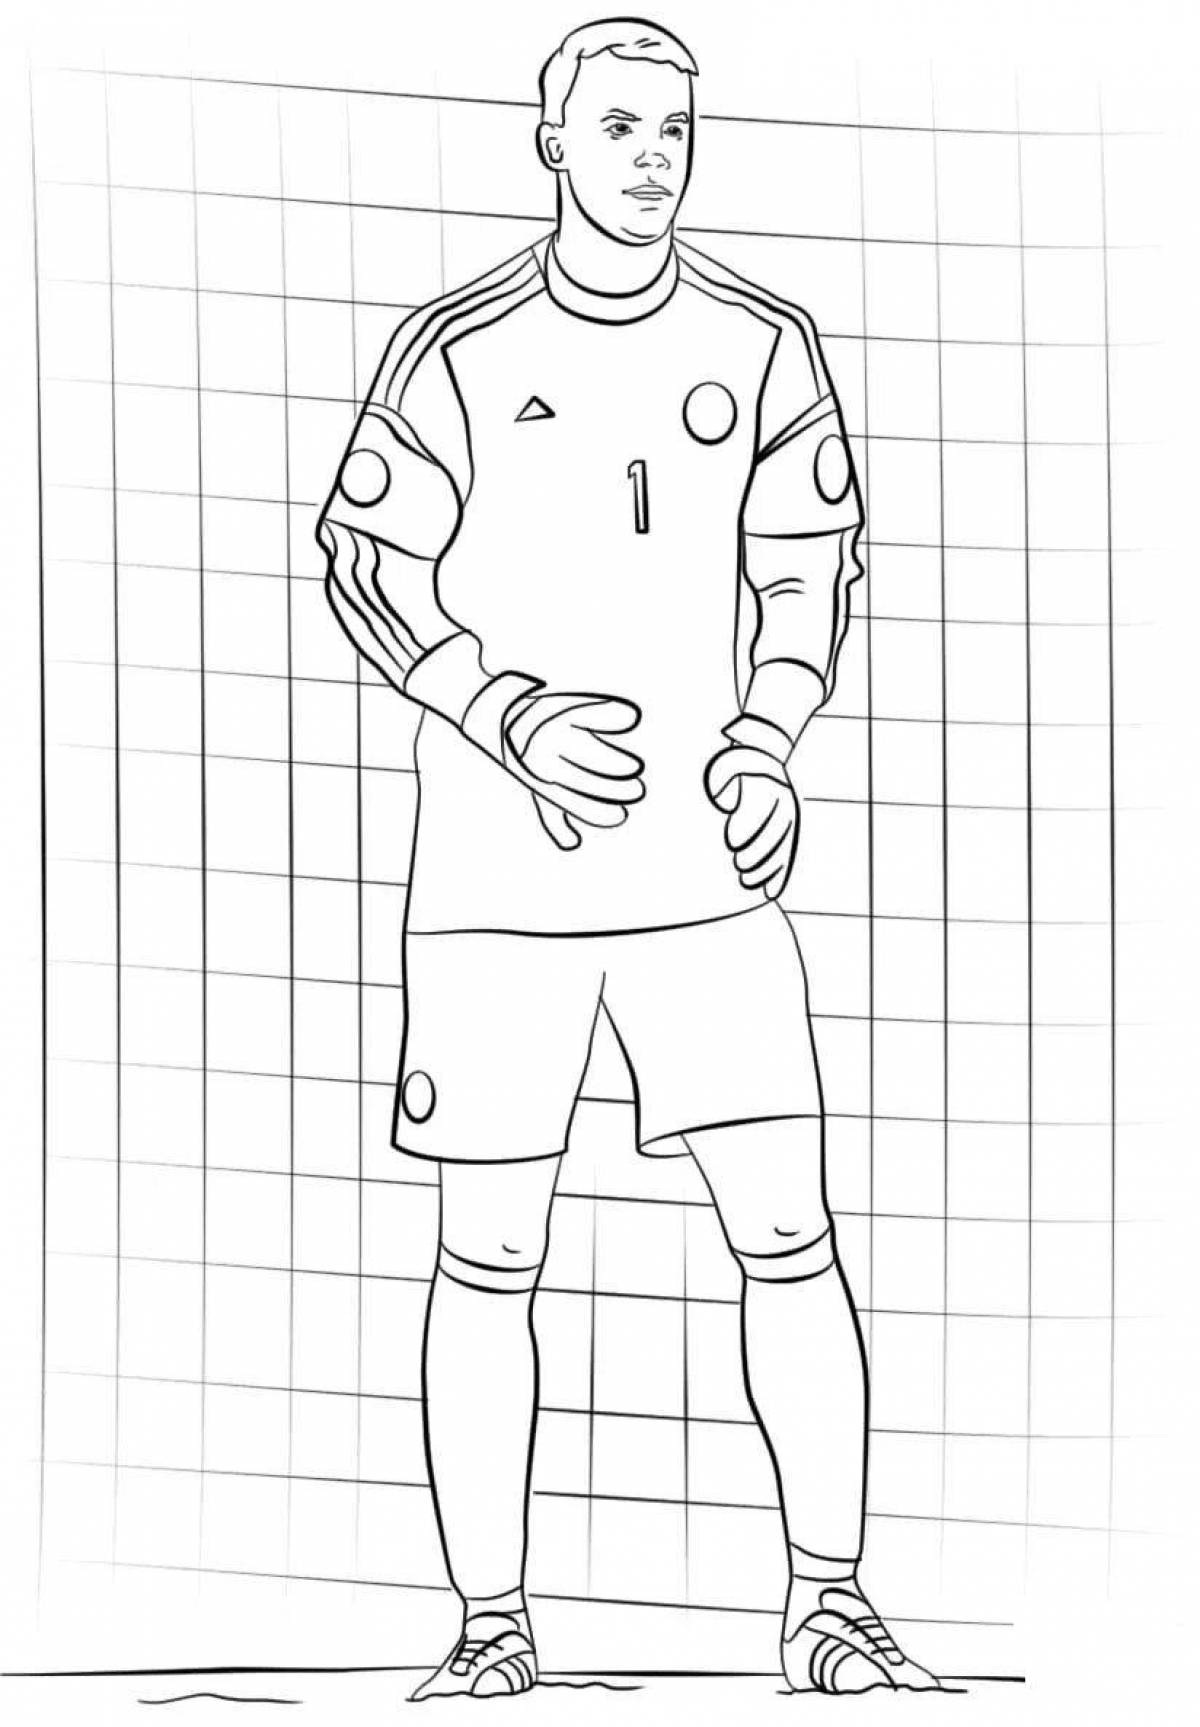 Dynamic football coloring book